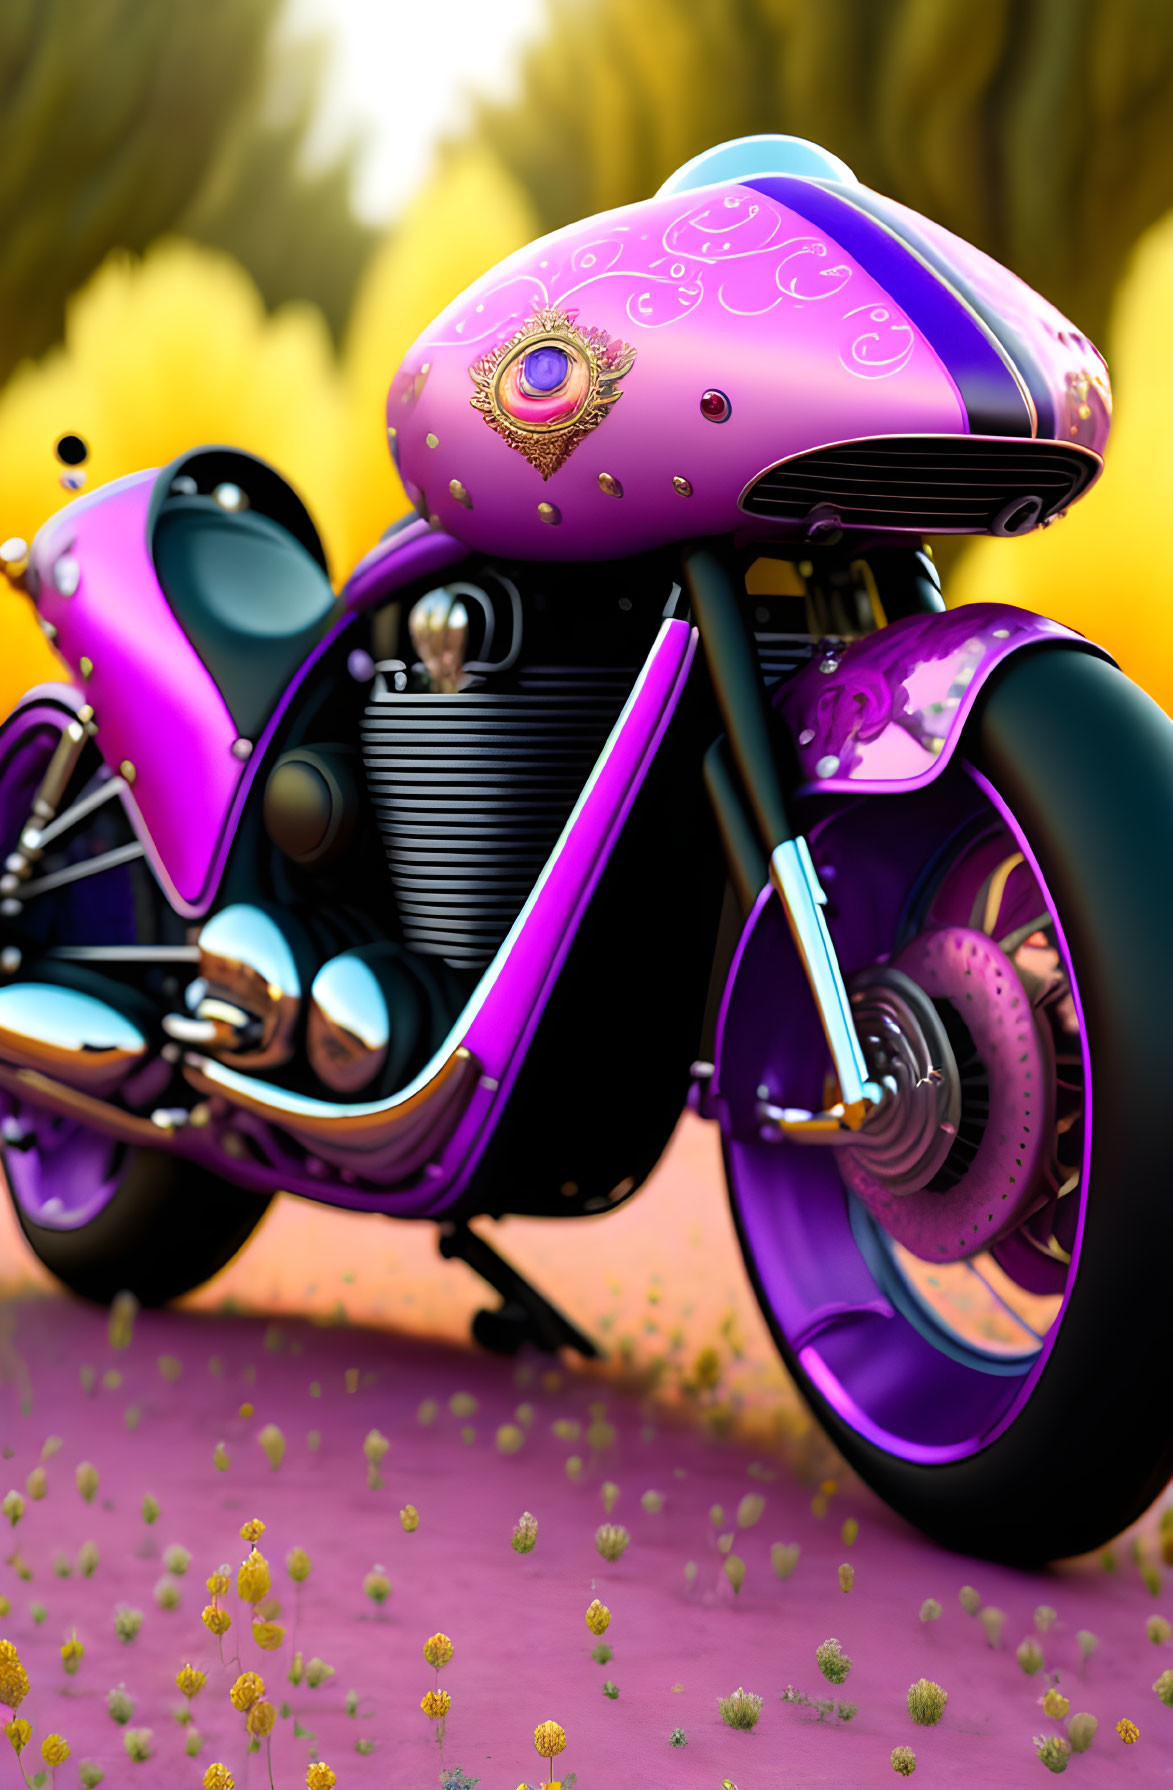 Purple Motorcycle with Ornate Designs in Field of Yellow Flowers